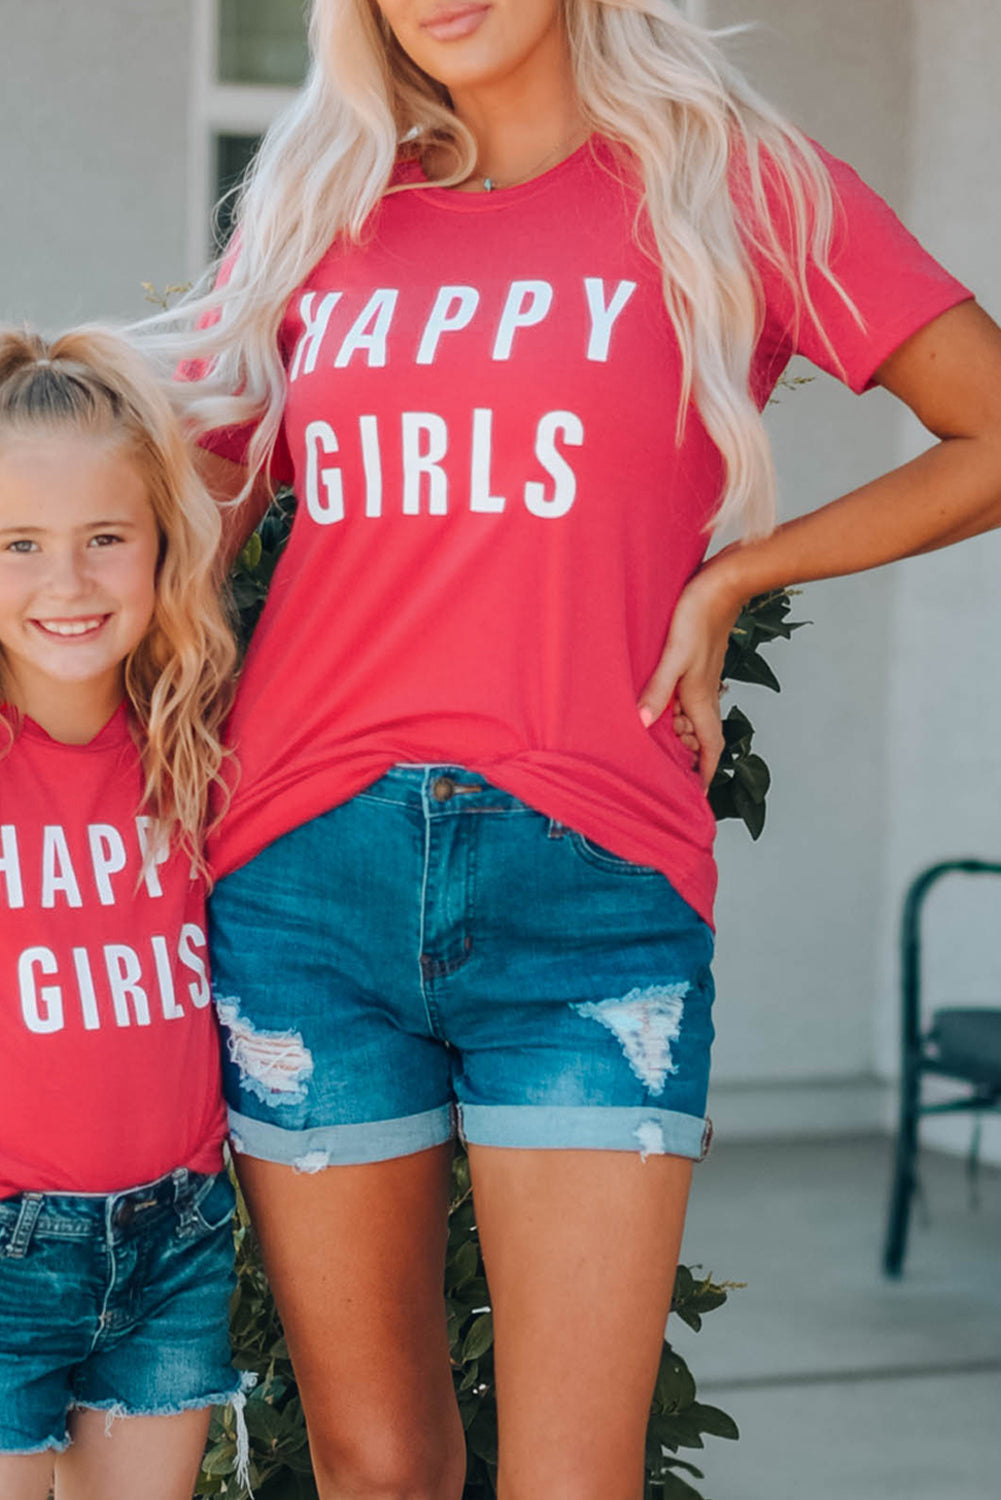 Mom Happy Girls Letters Print Family Matching Tee